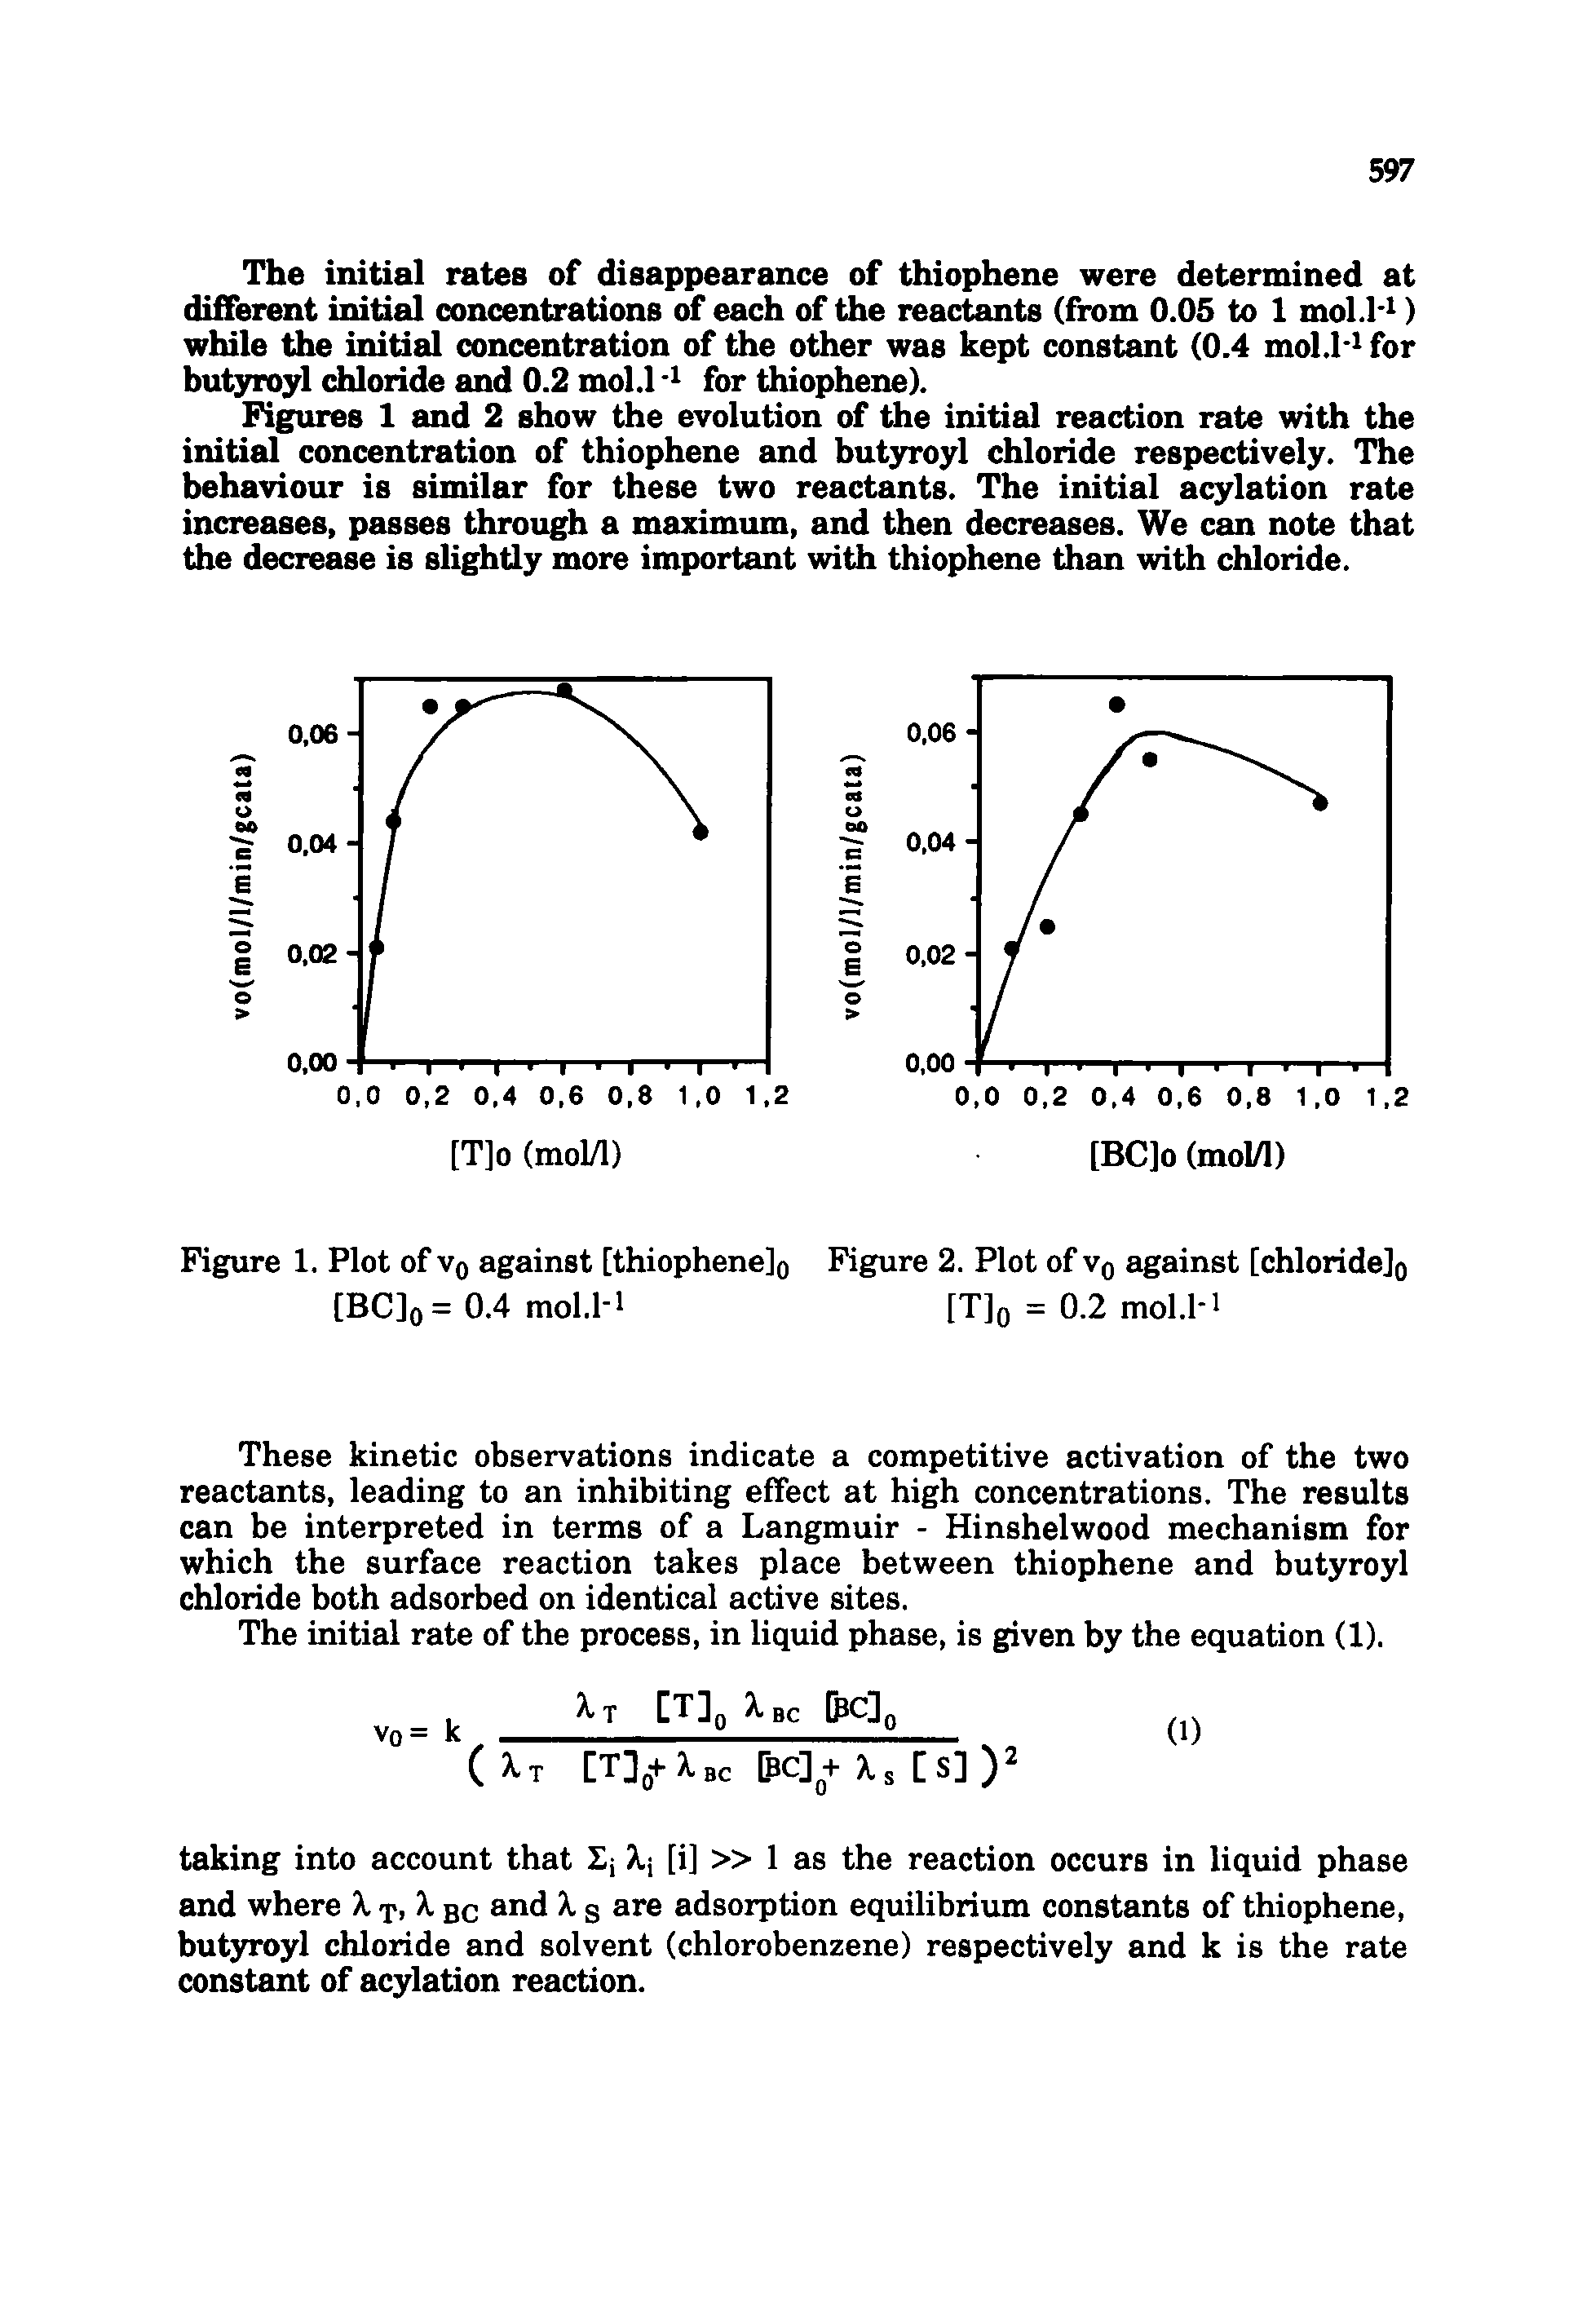 Figures 1 and 2 show the evolution of the initial reaction rate with the initial concentration of thiophene and butyroyl chloride respectively. The behaviour is similar for these two reactants. The initial acylation rate increases, passes through a maximum, and then decreases. We can note that the decrease is slightly more important with thiophene than with chloride.